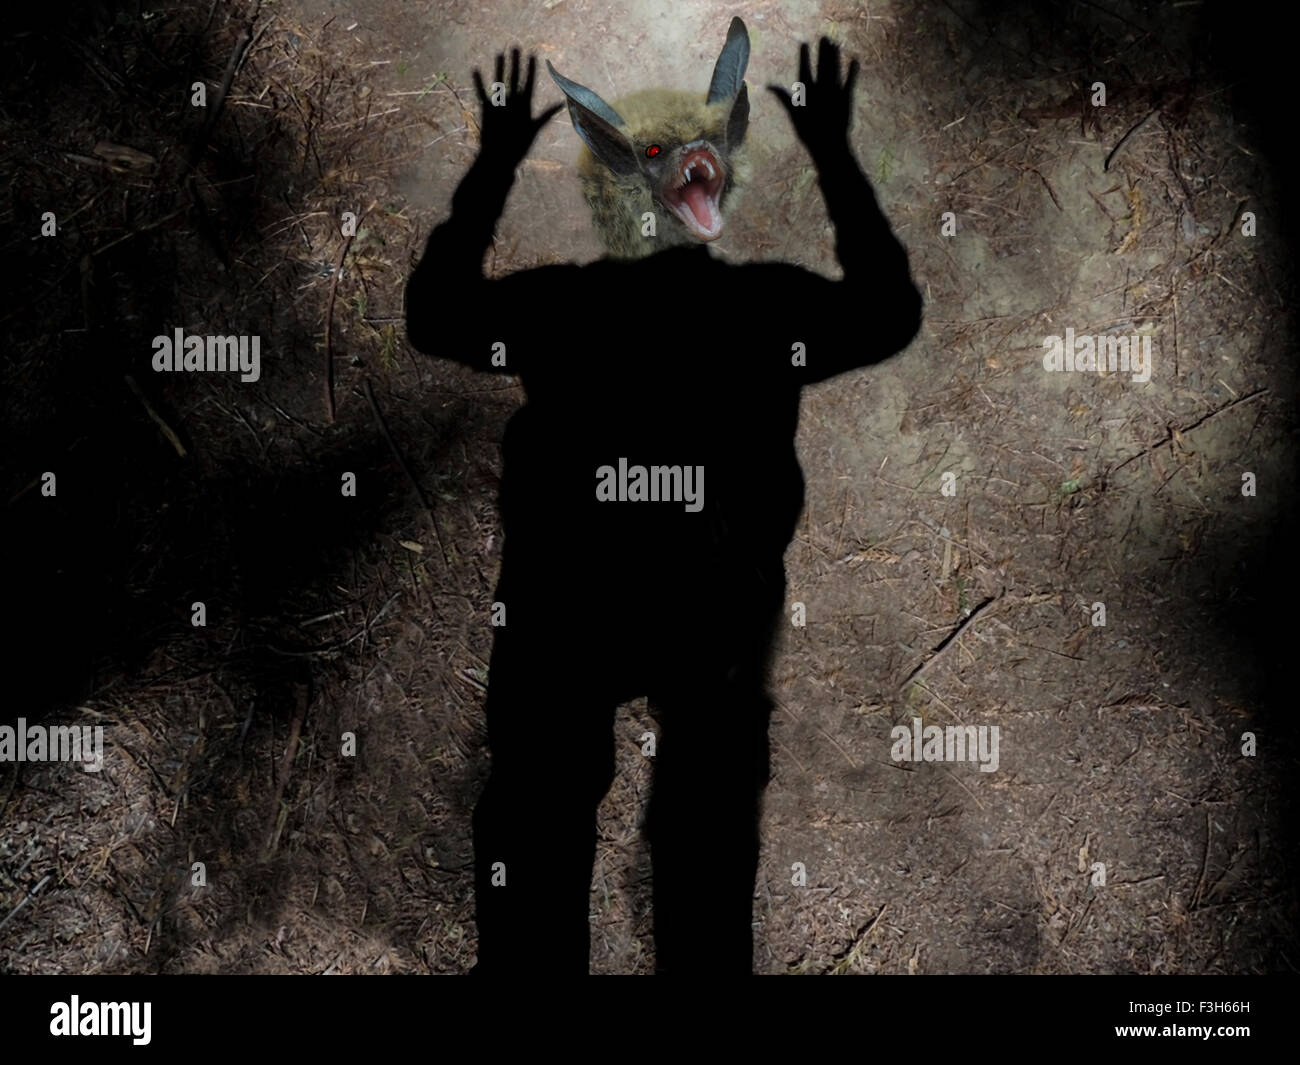 A Bat and a shadow are composited into a scary creature for halloween horror. Stock Photo